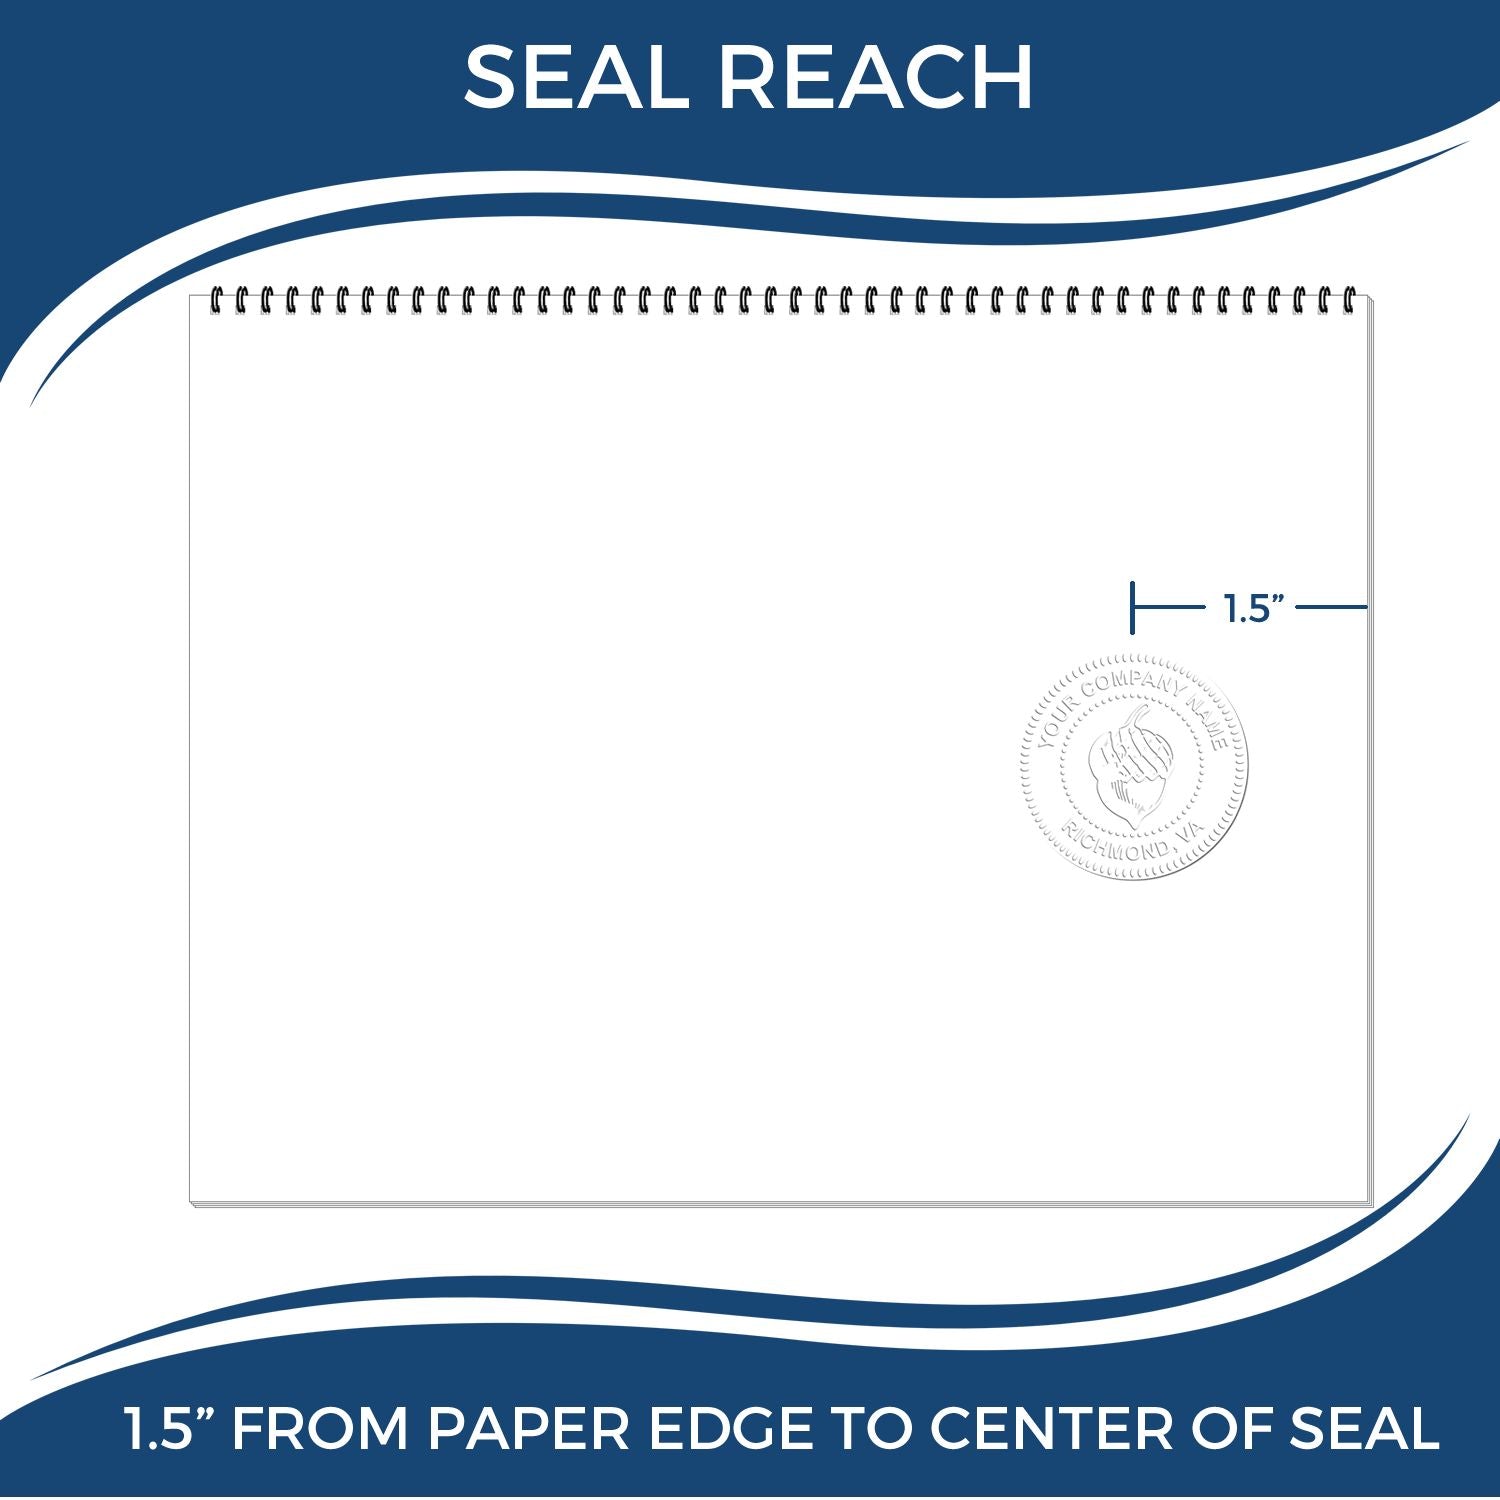 An infographic showing the seal reach which is represented by a ruler and a miniature seal image of the State of Utah Soft Land Surveyor Embossing Seal